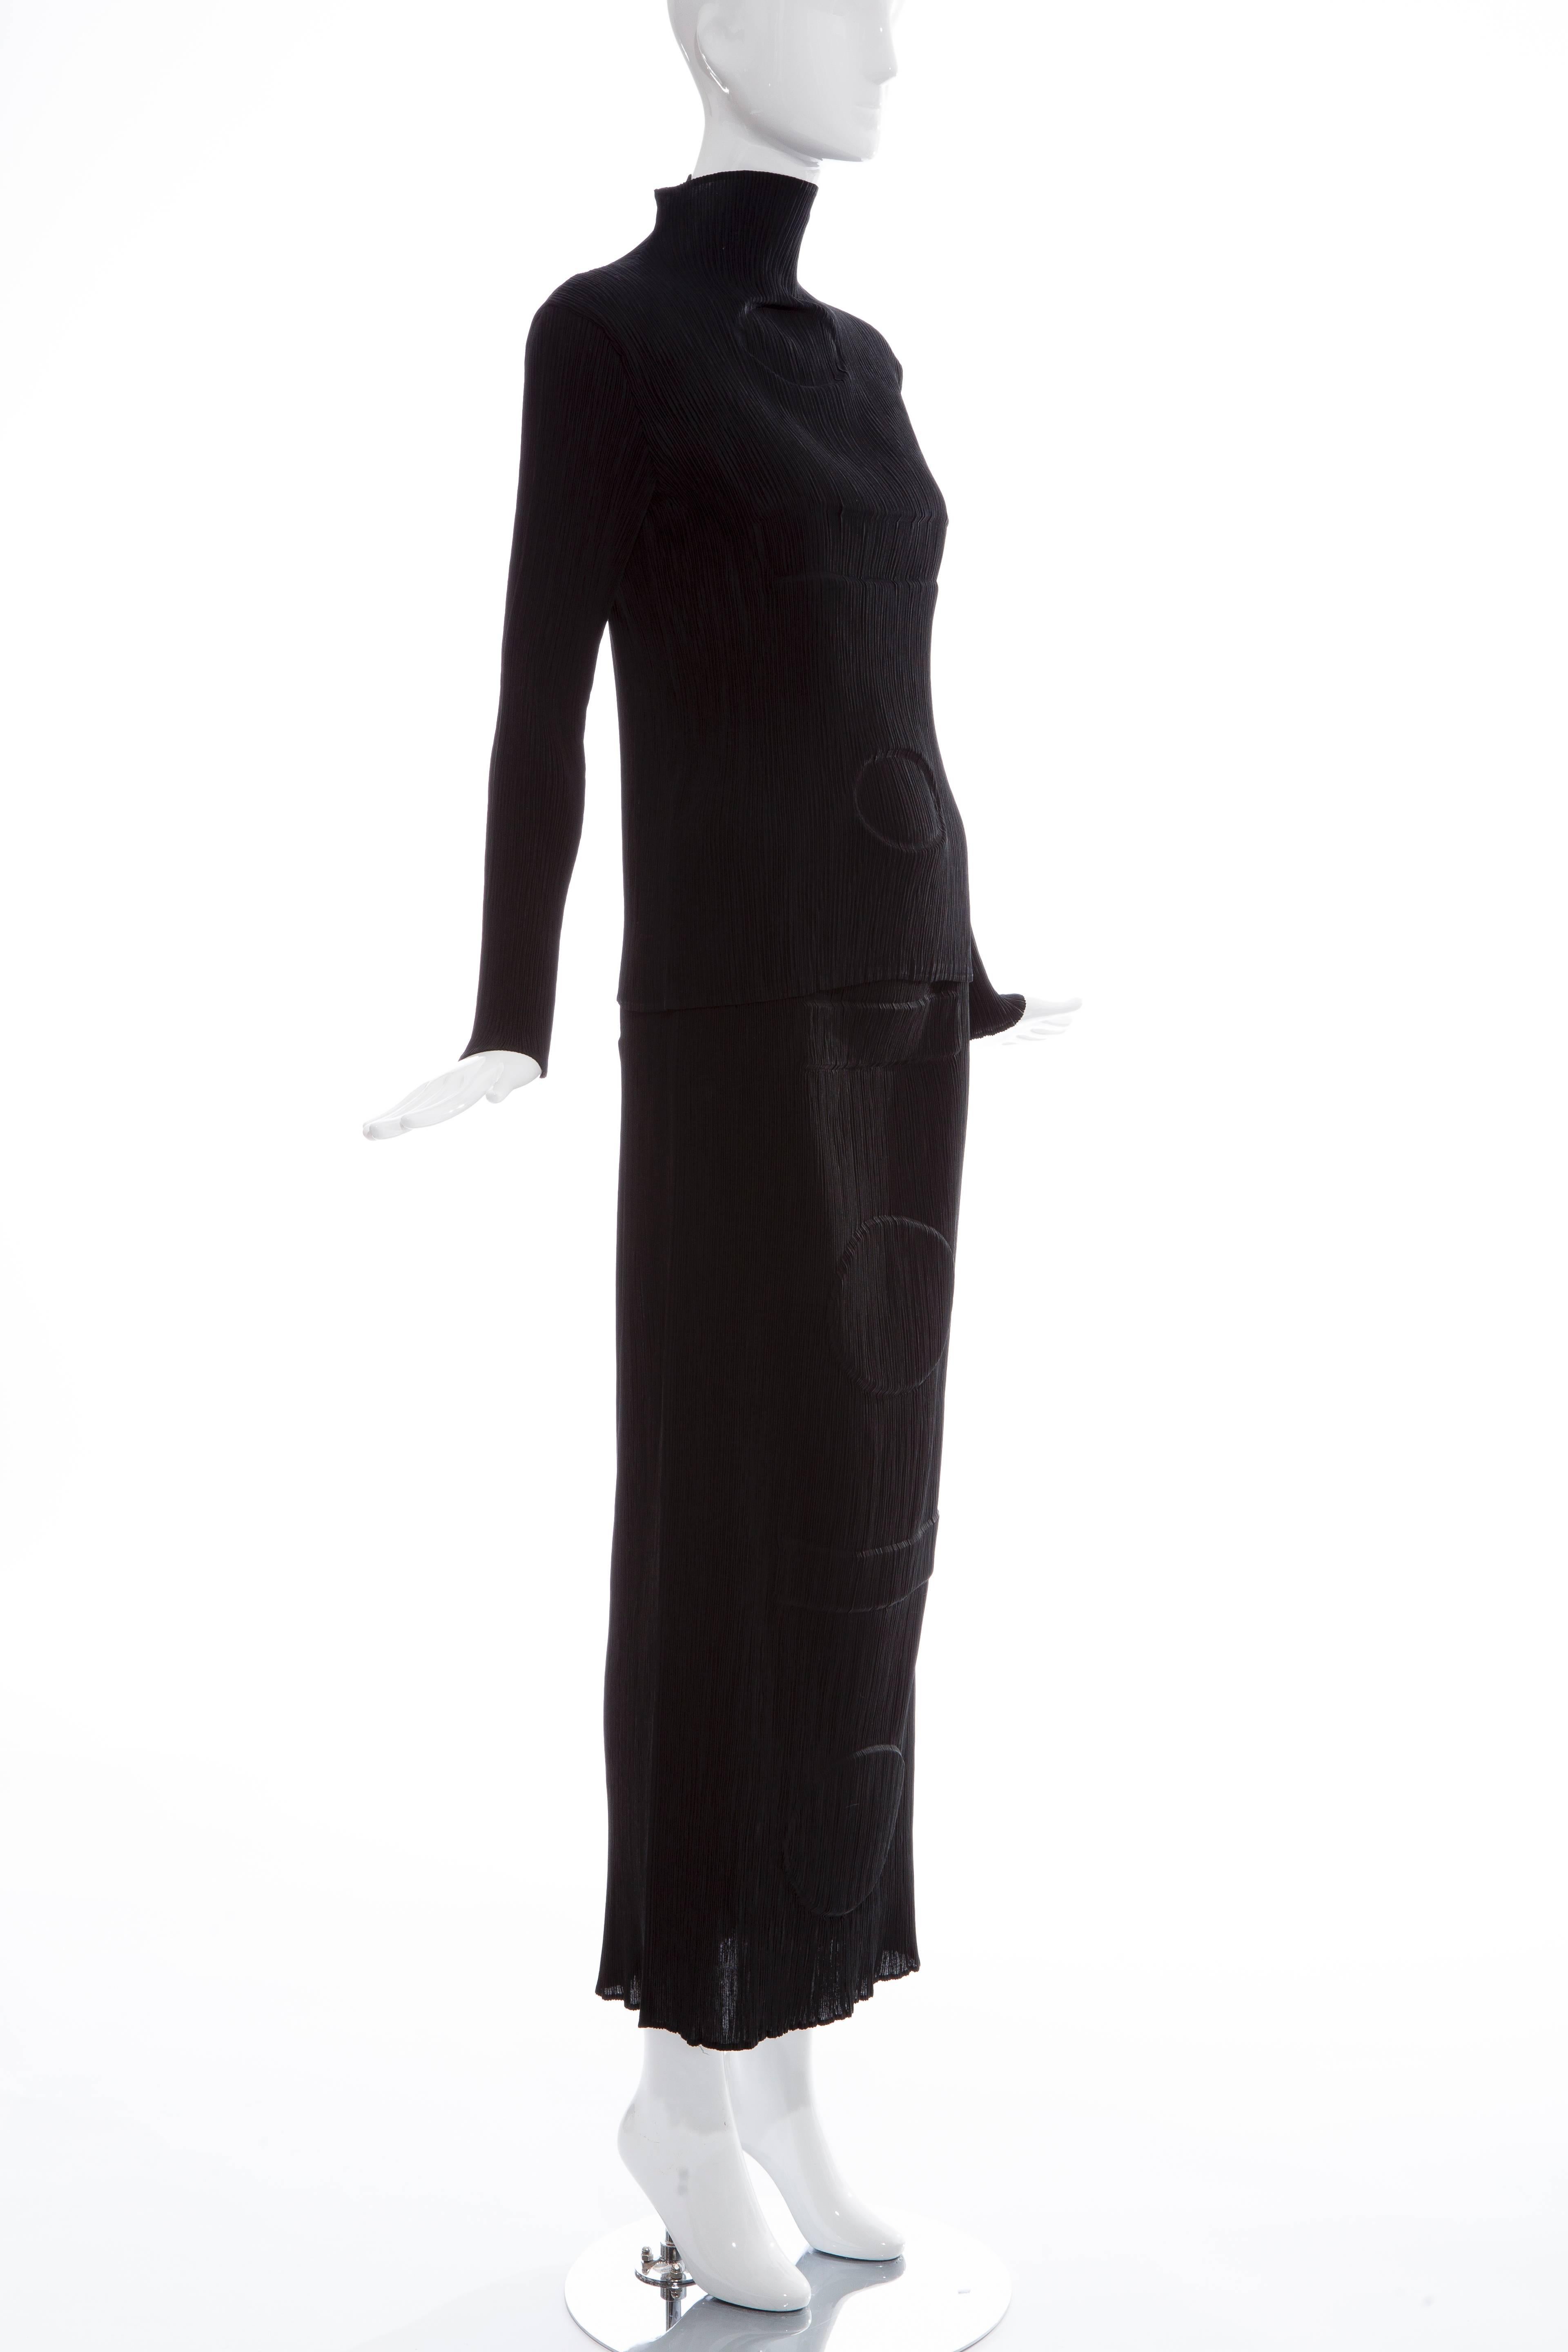 Issey Miyake, circa 1990's black micro pleated orb skirt suit.

Top: (all can expand to 20